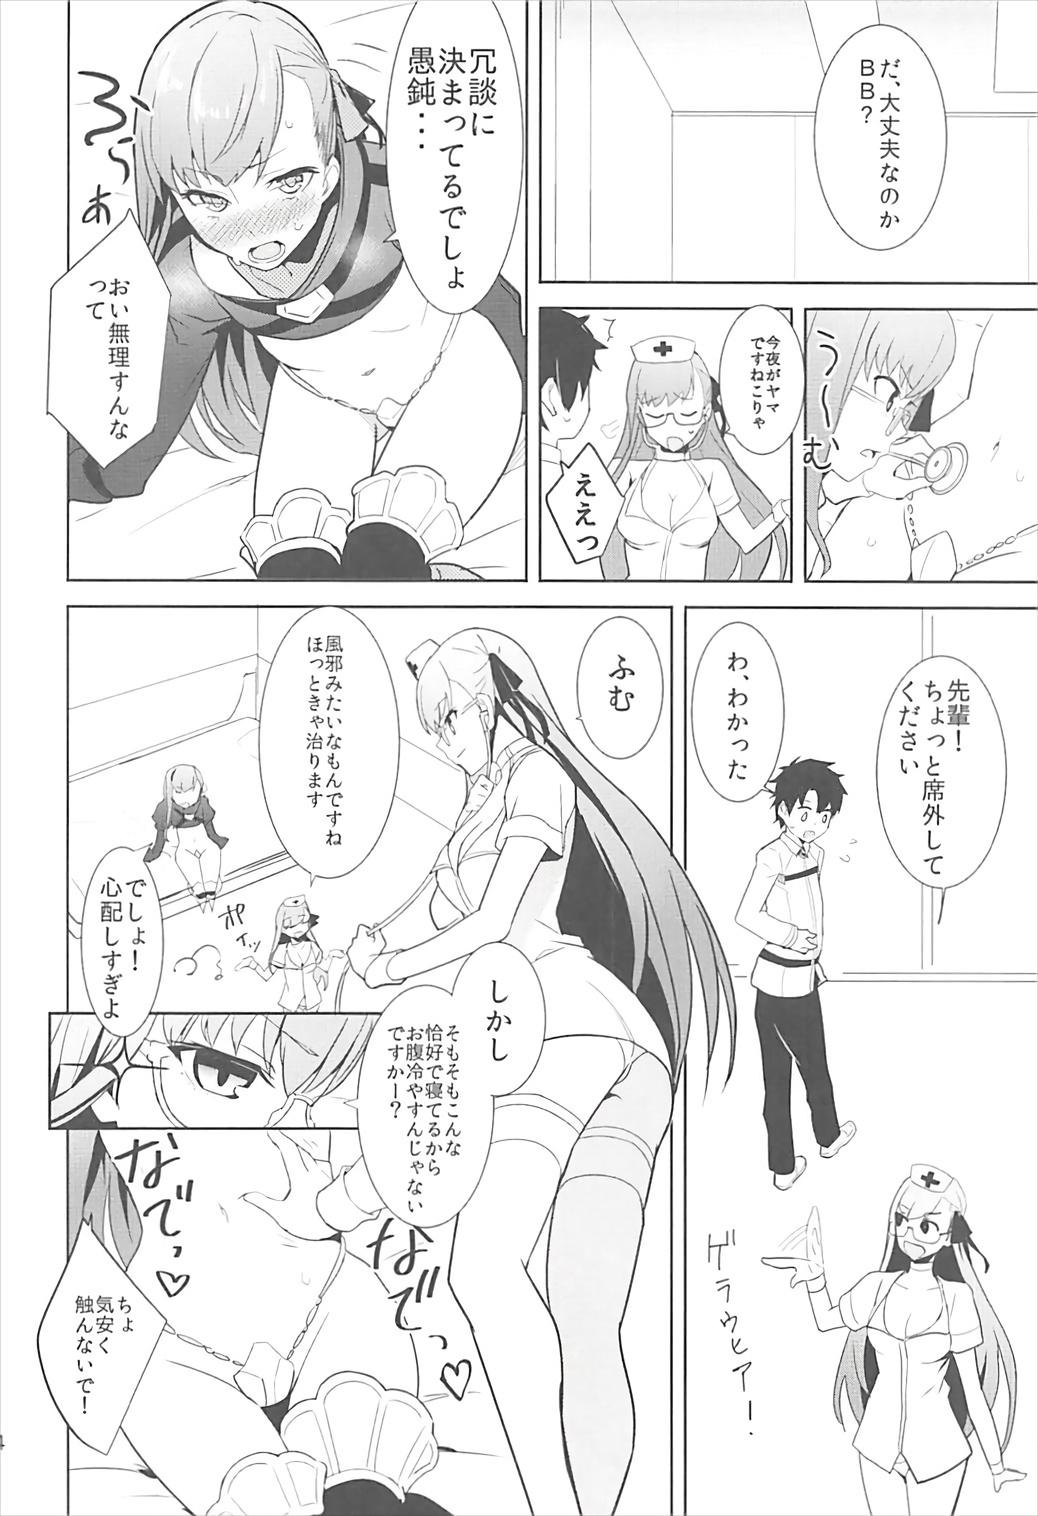 Animated In the Passion Melty heart.2 - Fate grand order Rico - Page 5